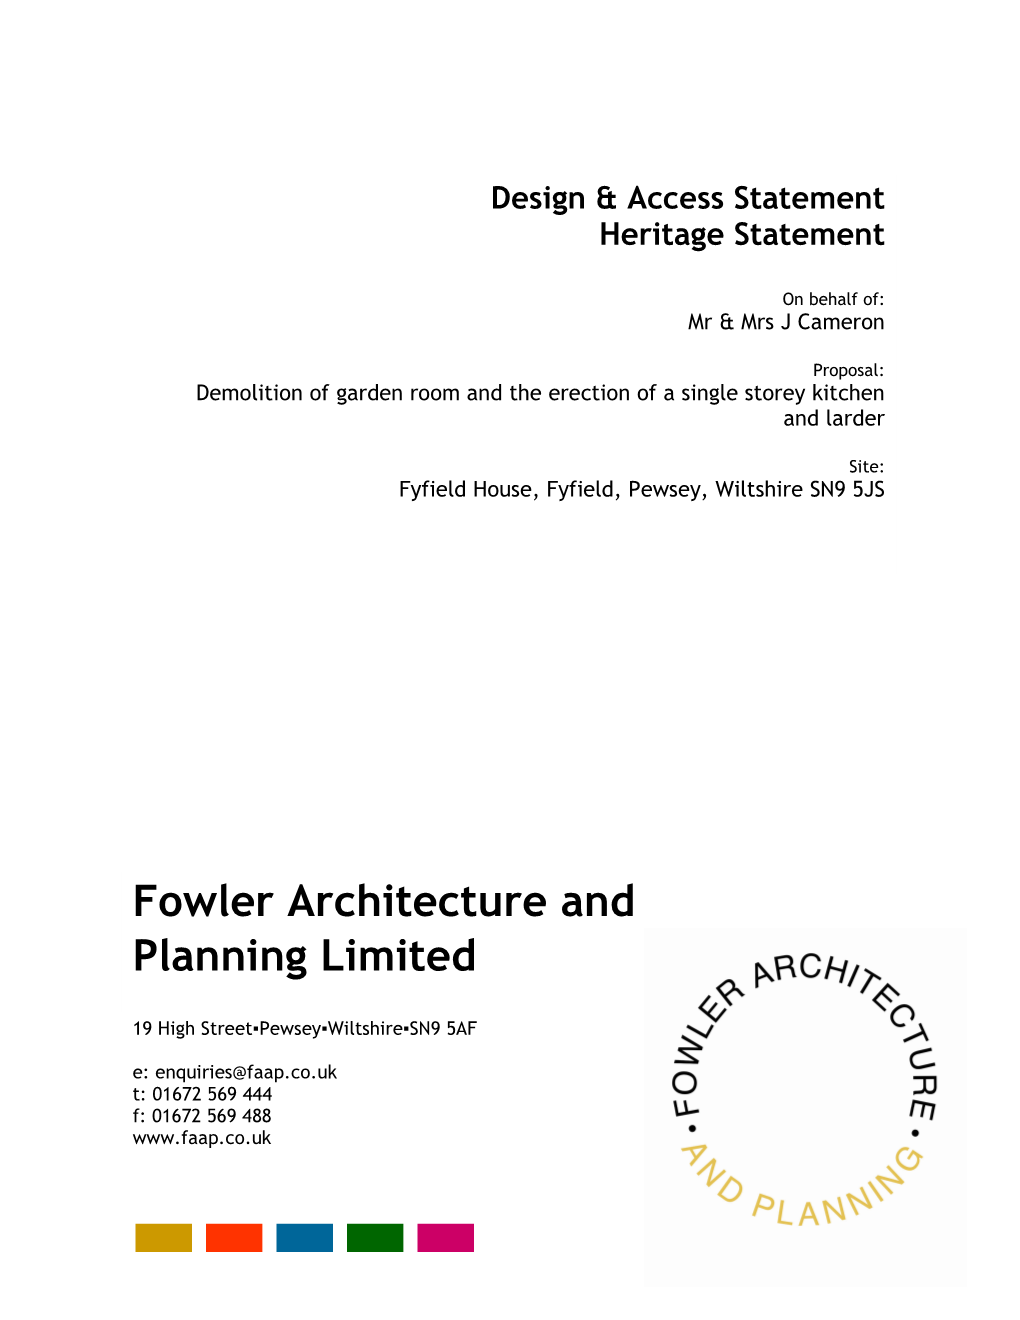 Fowler Architecture and Planning Limited